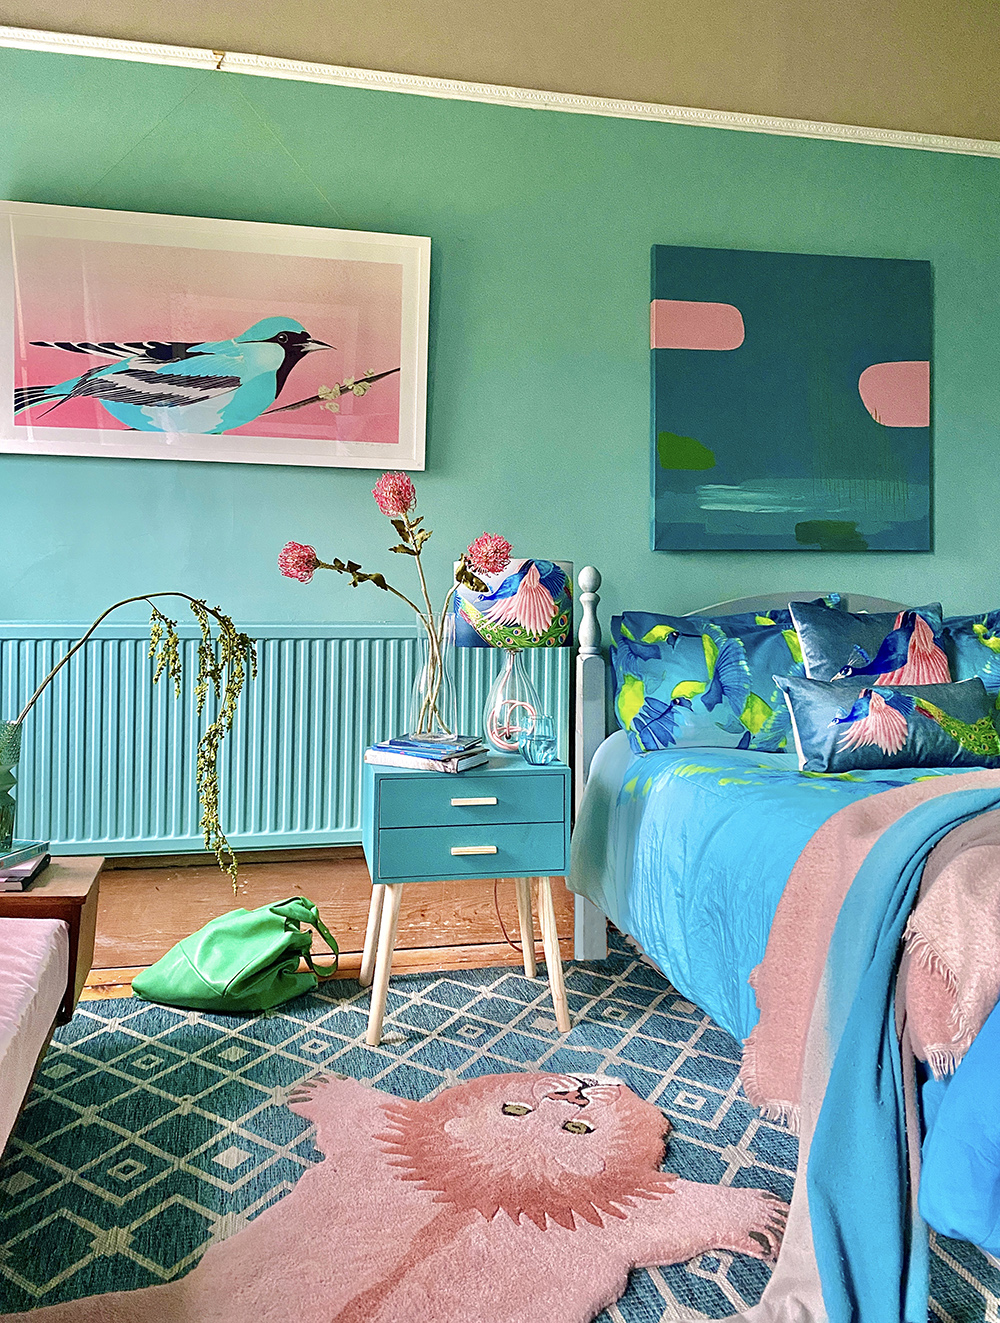 Colourful bedroom decor - blue, pink and green colour scheme inspiration